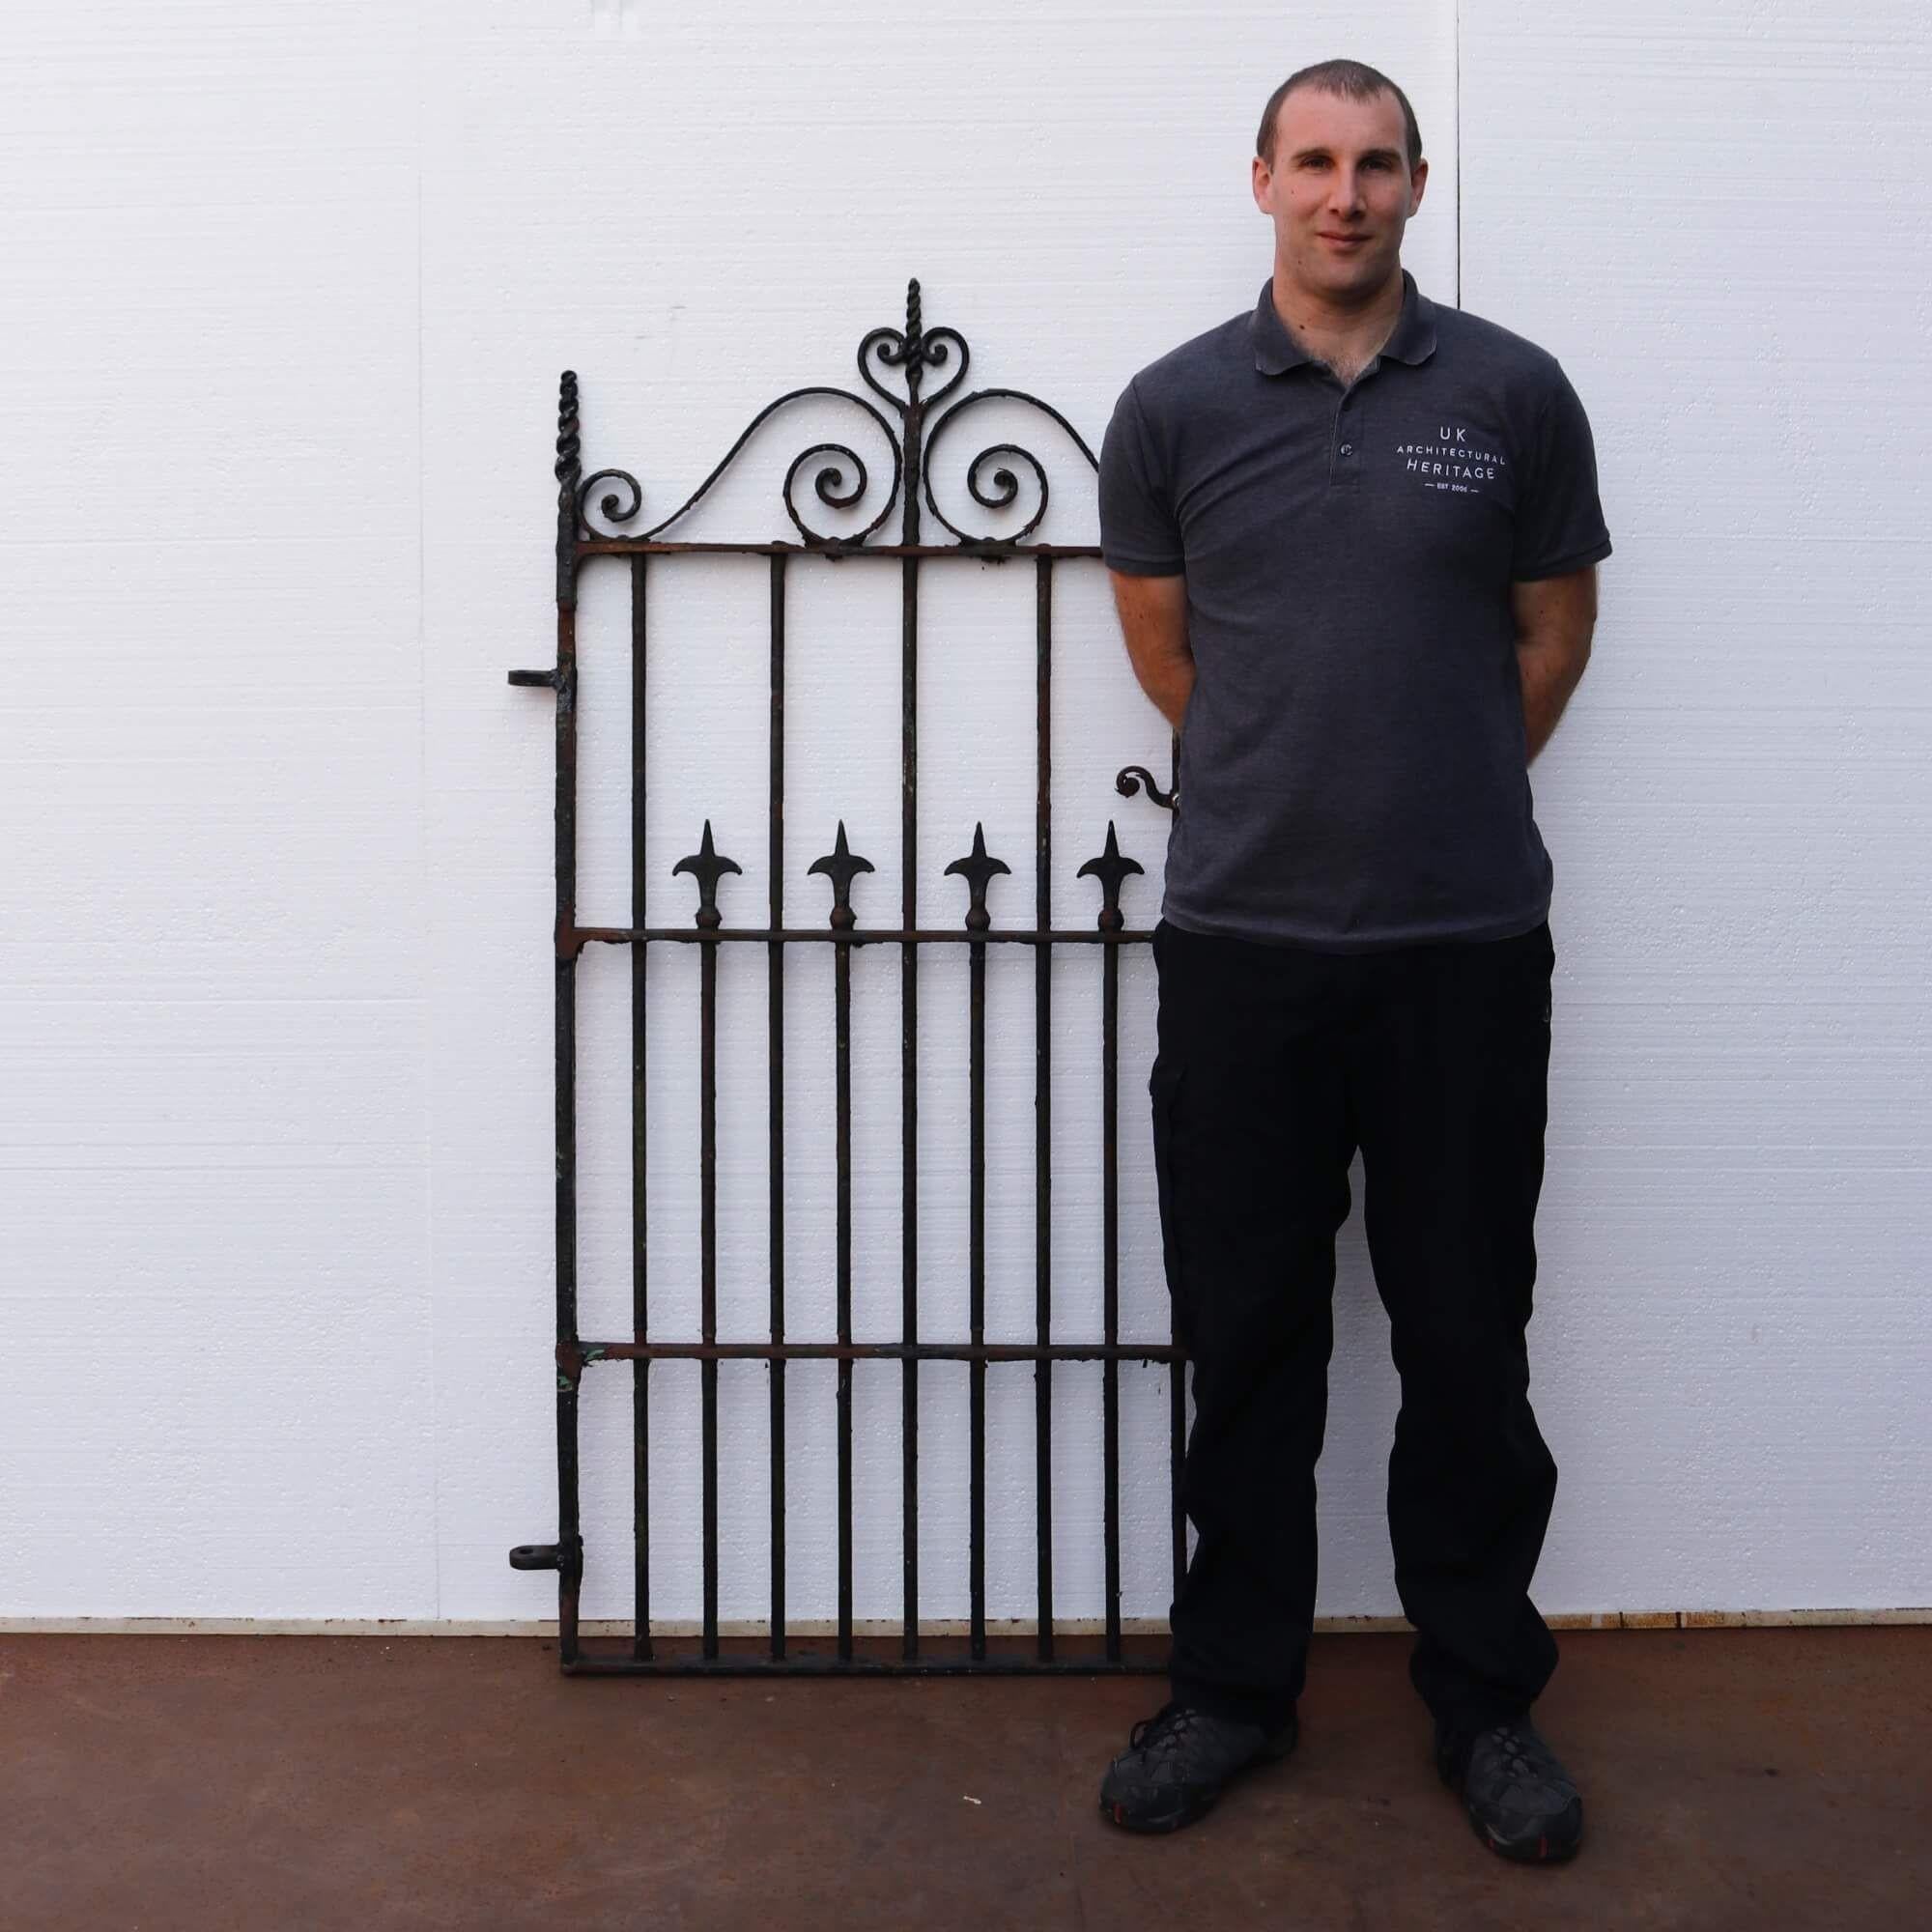 Elegant antique Victorian wrought iron pedestrian gate originating from circa 1860. With its generous height and scrolling, twisting design this lovely gate is smartly designed to give it a timeless quality. Its original working latch is another